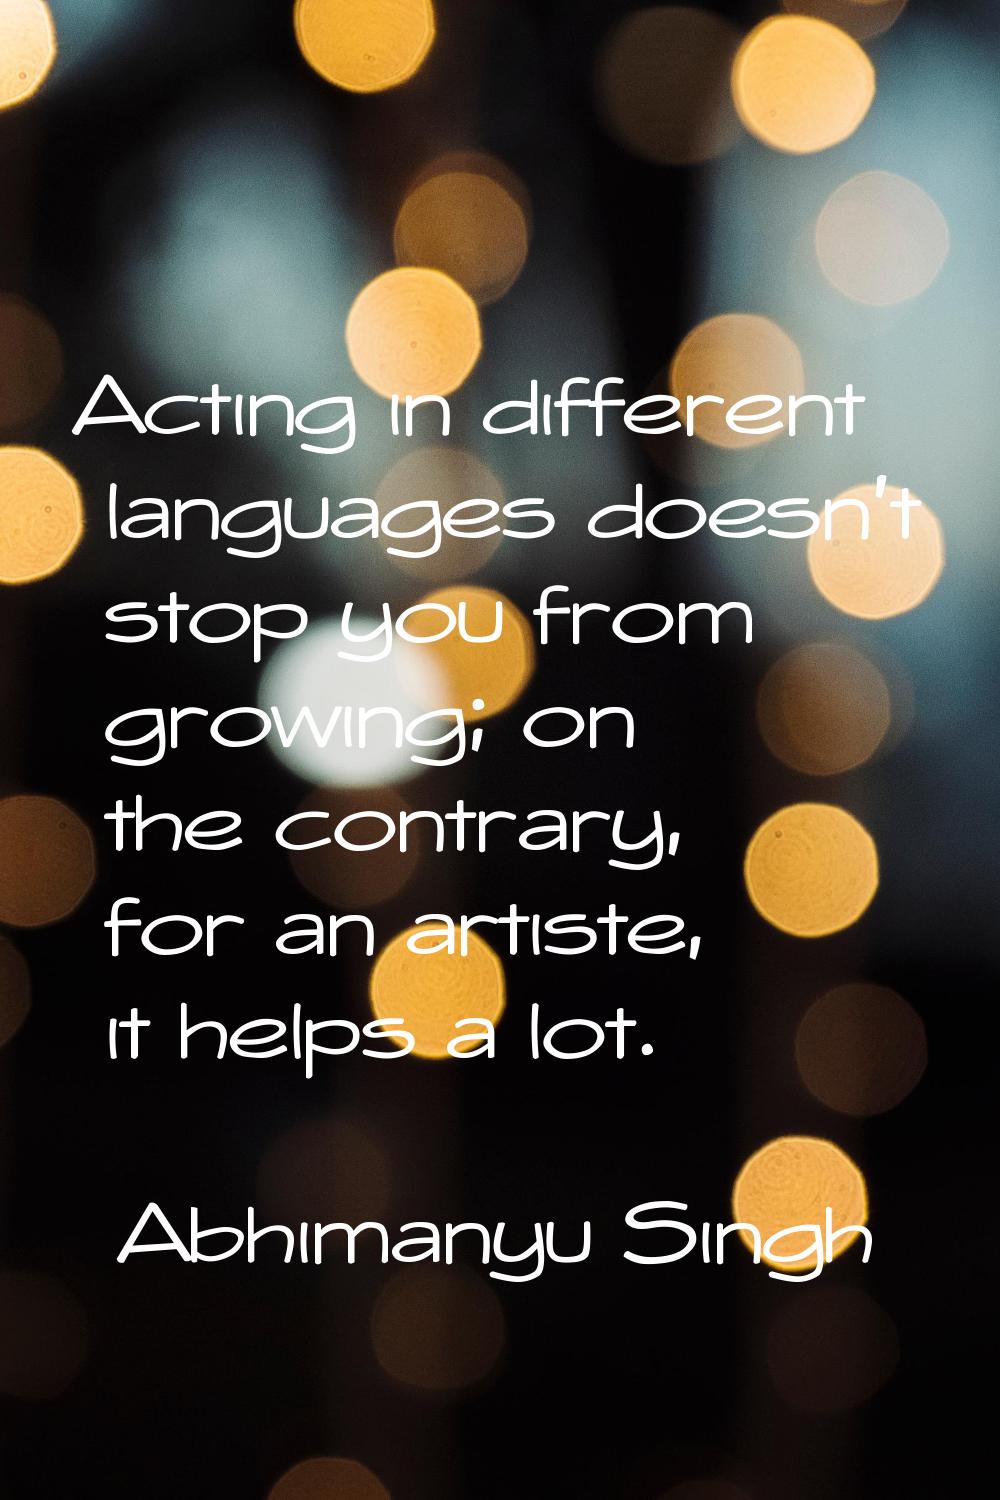 Acting in different languages doesn't stop you from growing; on the contrary, for an artiste, it he